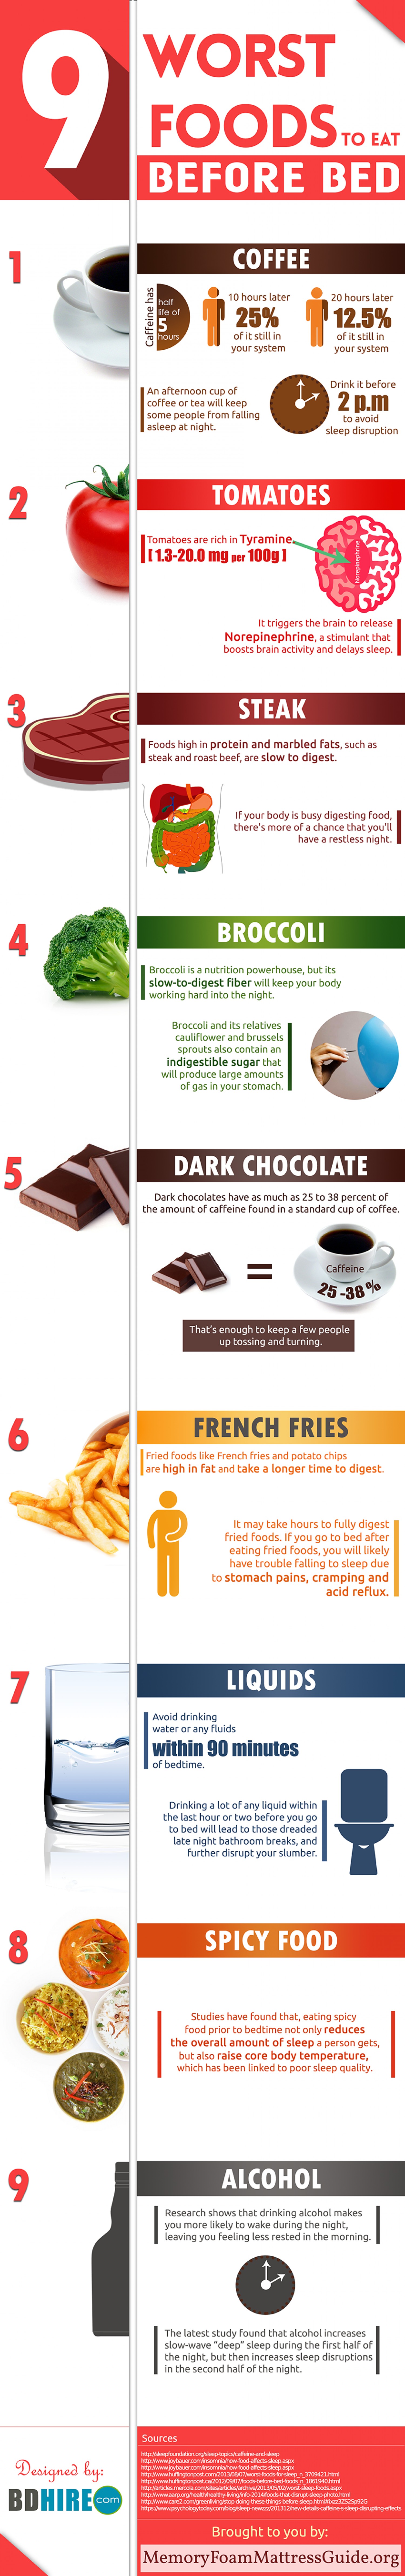 9-worst-foods-to-eat-before-bed-infographic_555729cc8cd7a_w1500